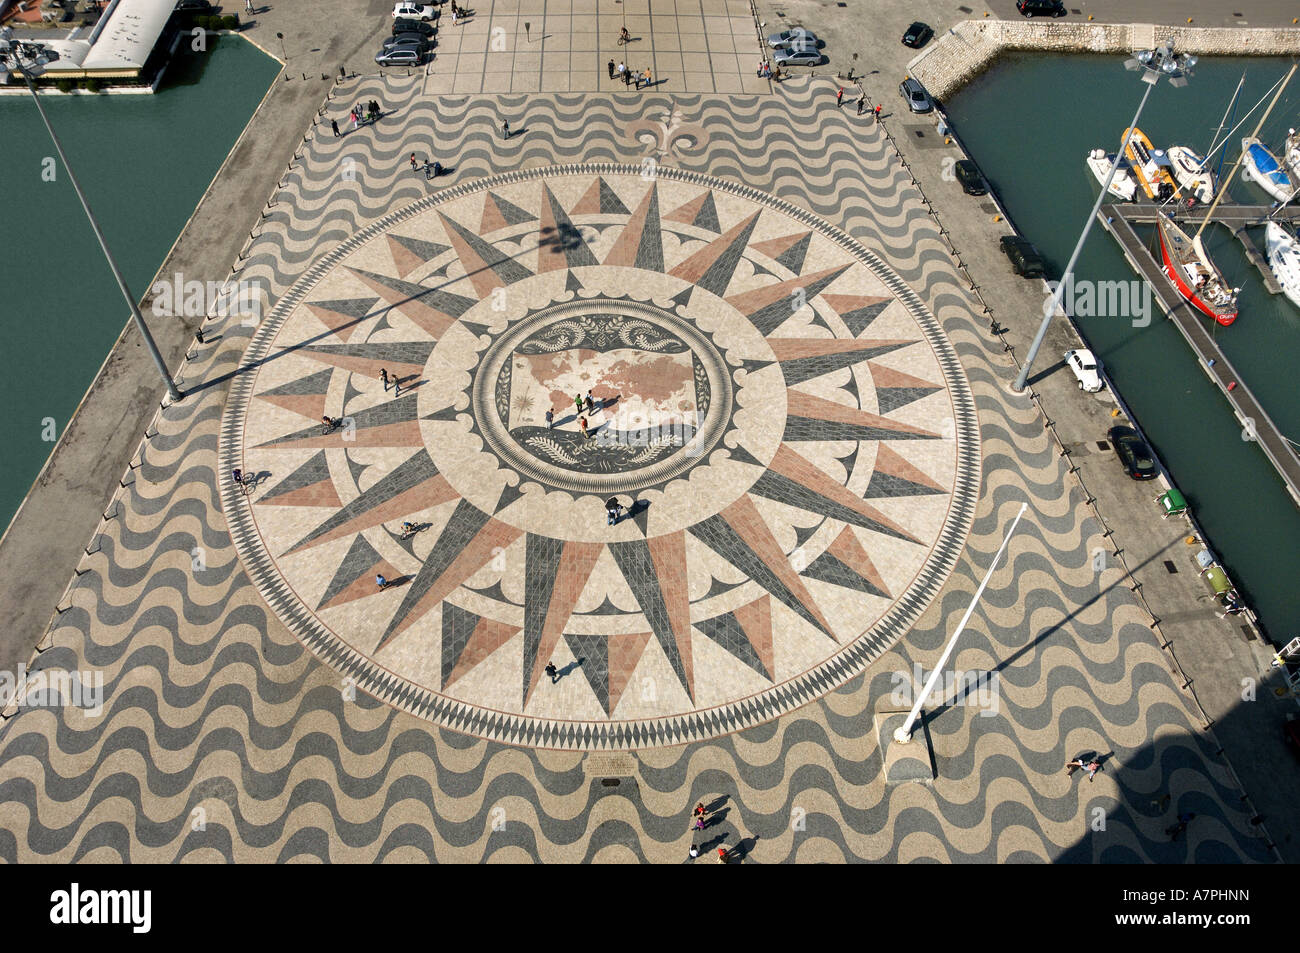 Portugal, Lisbon, Belem; view from top of the monument to the discoveries of the compass and world map on the pavement Stock Photo